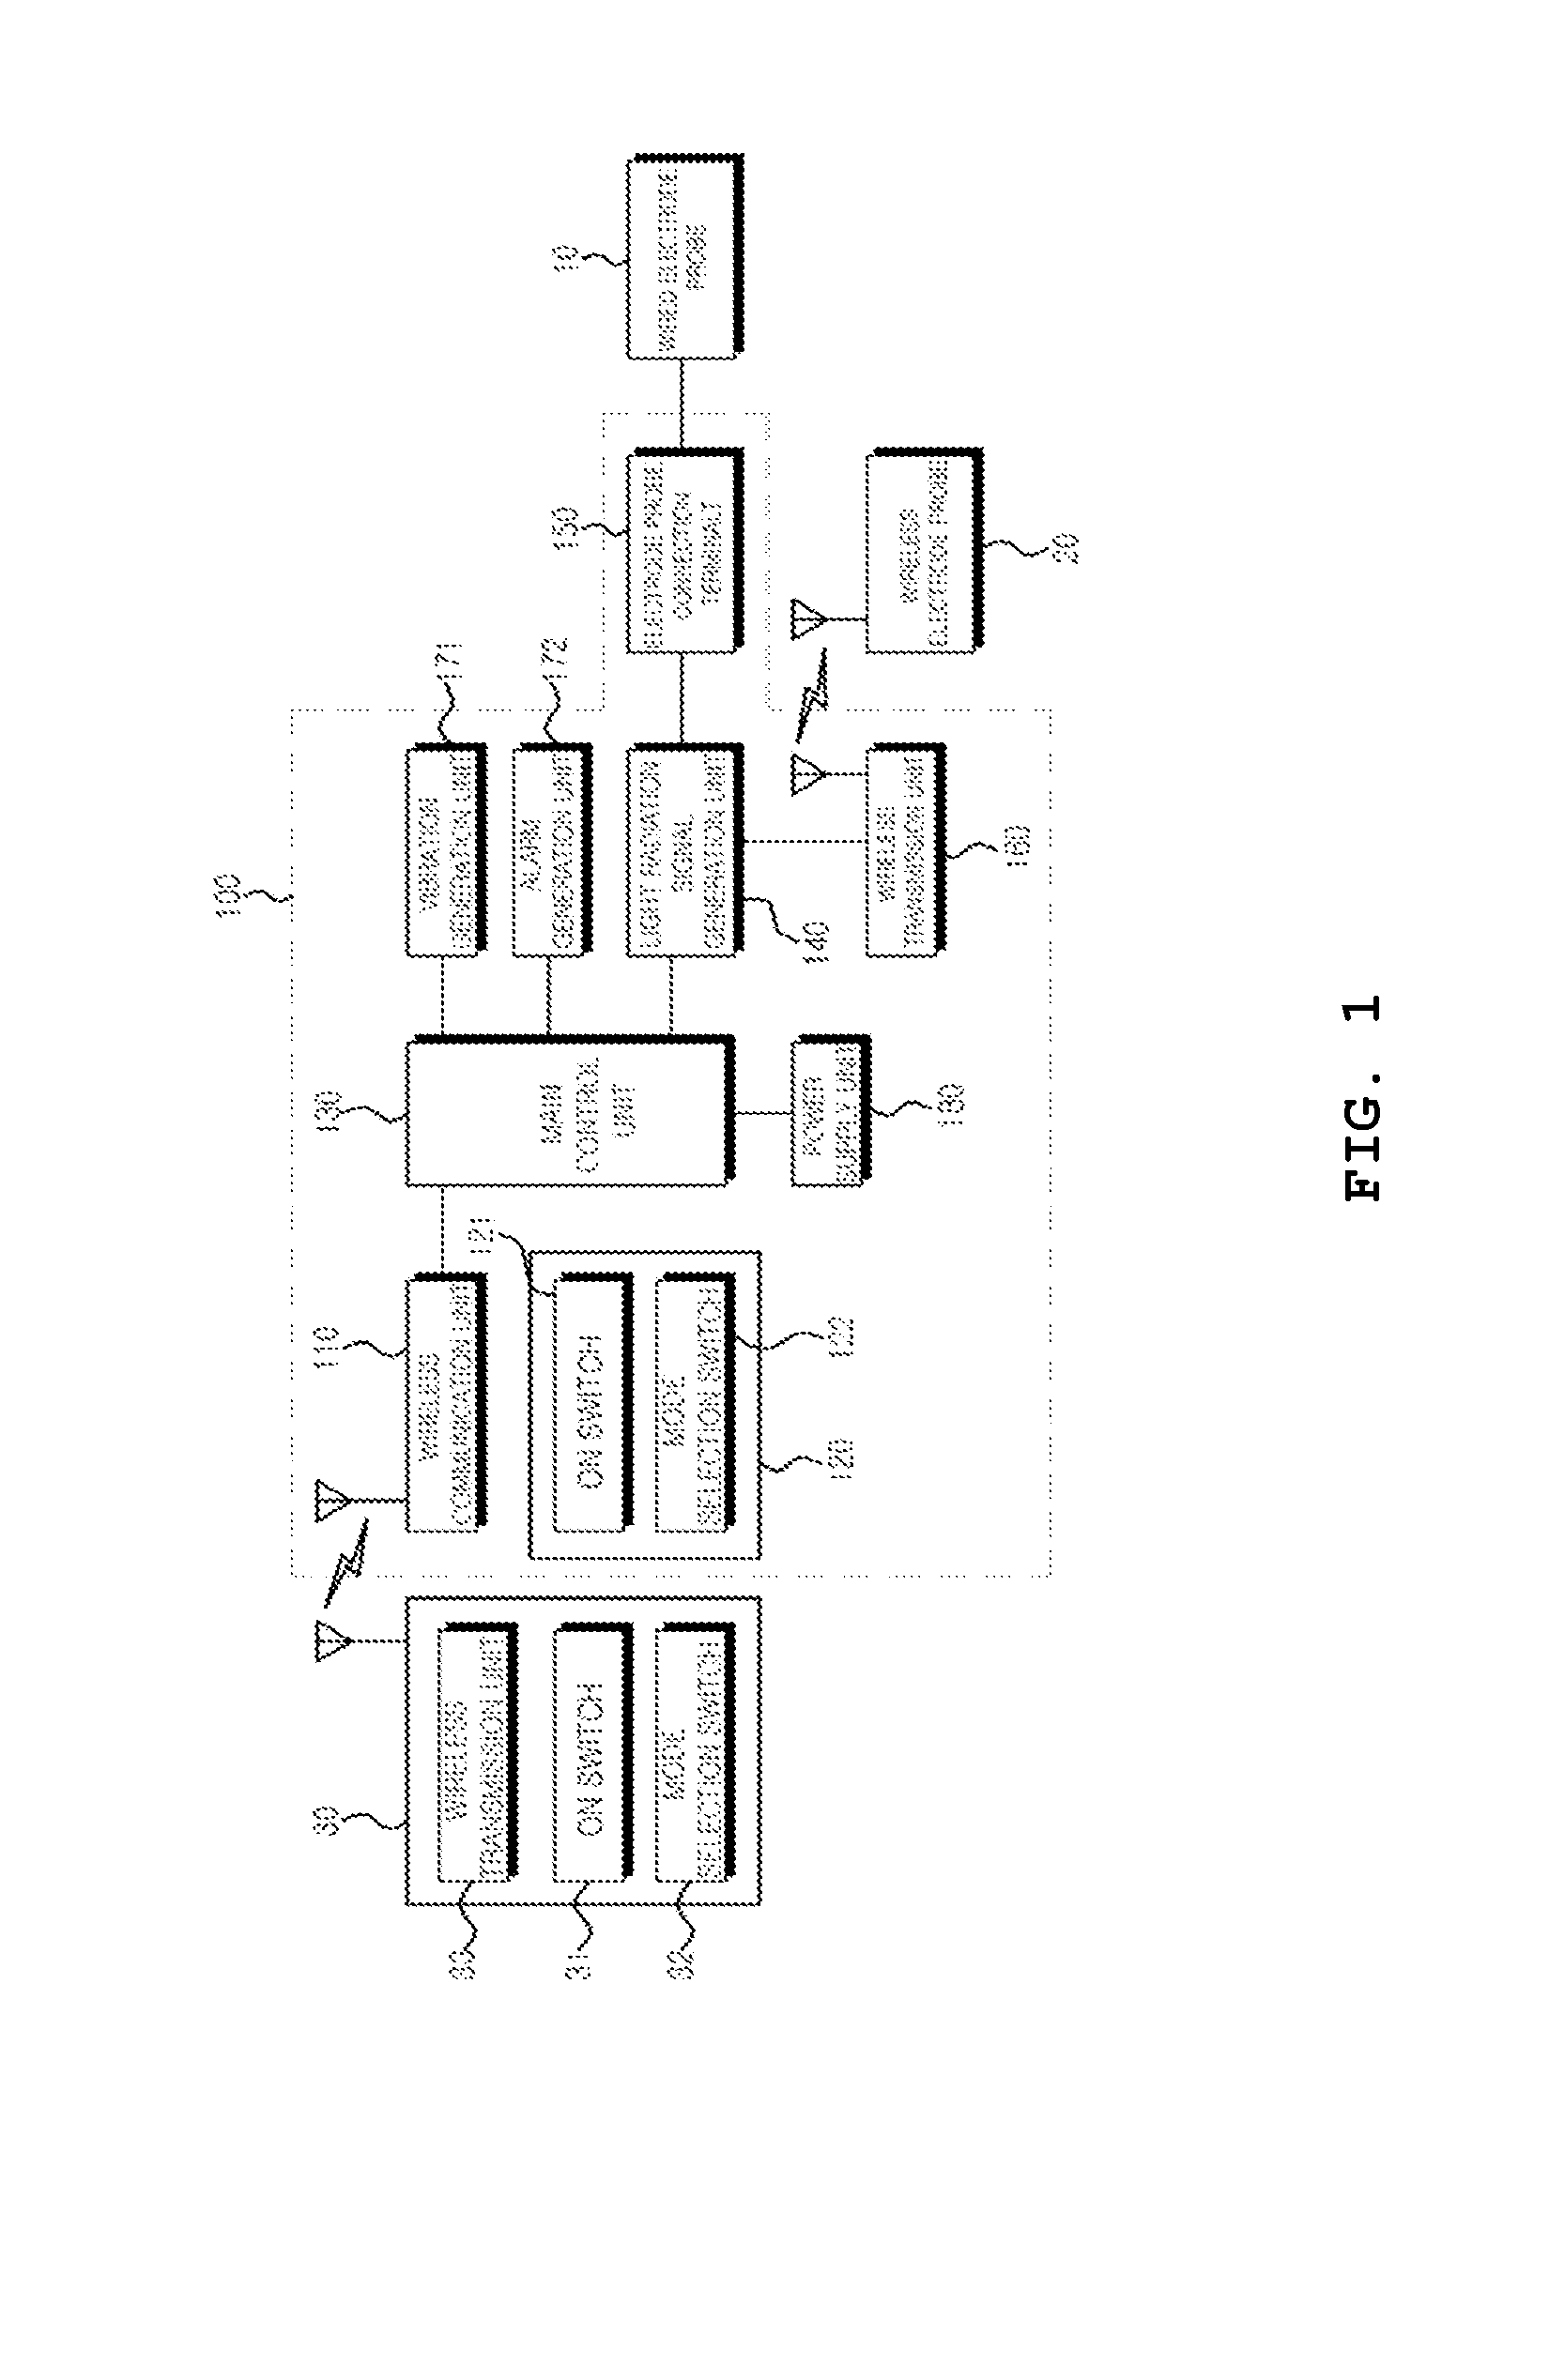 Apparatus for relaxing smooth muscles of human body